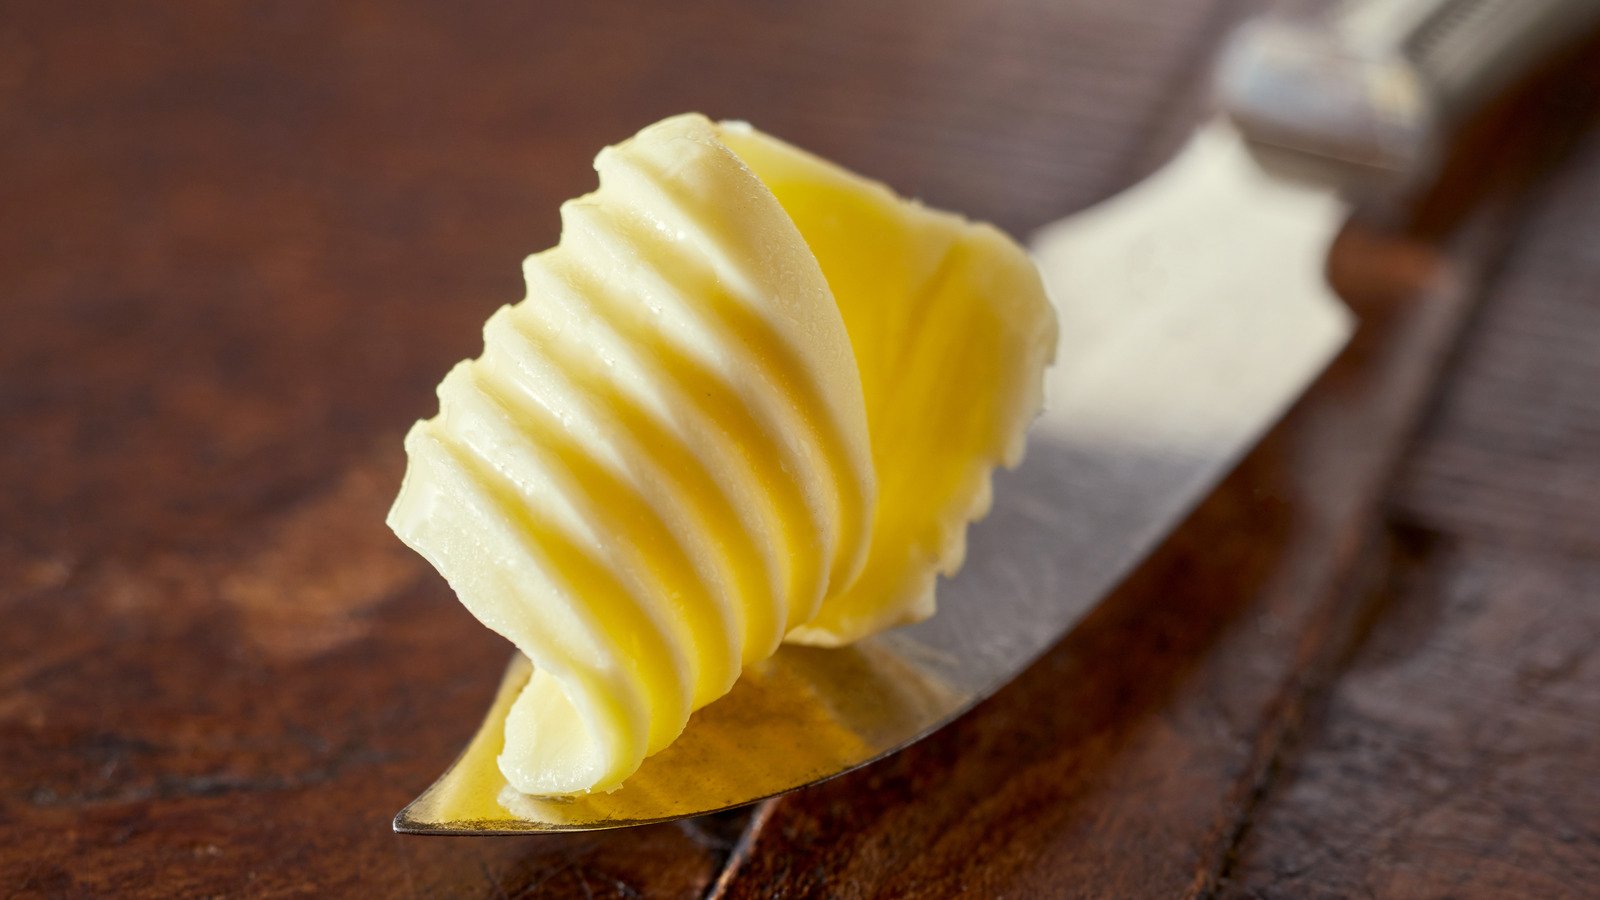 20 Fancy Butter Brands, Ranked From Worst To Best